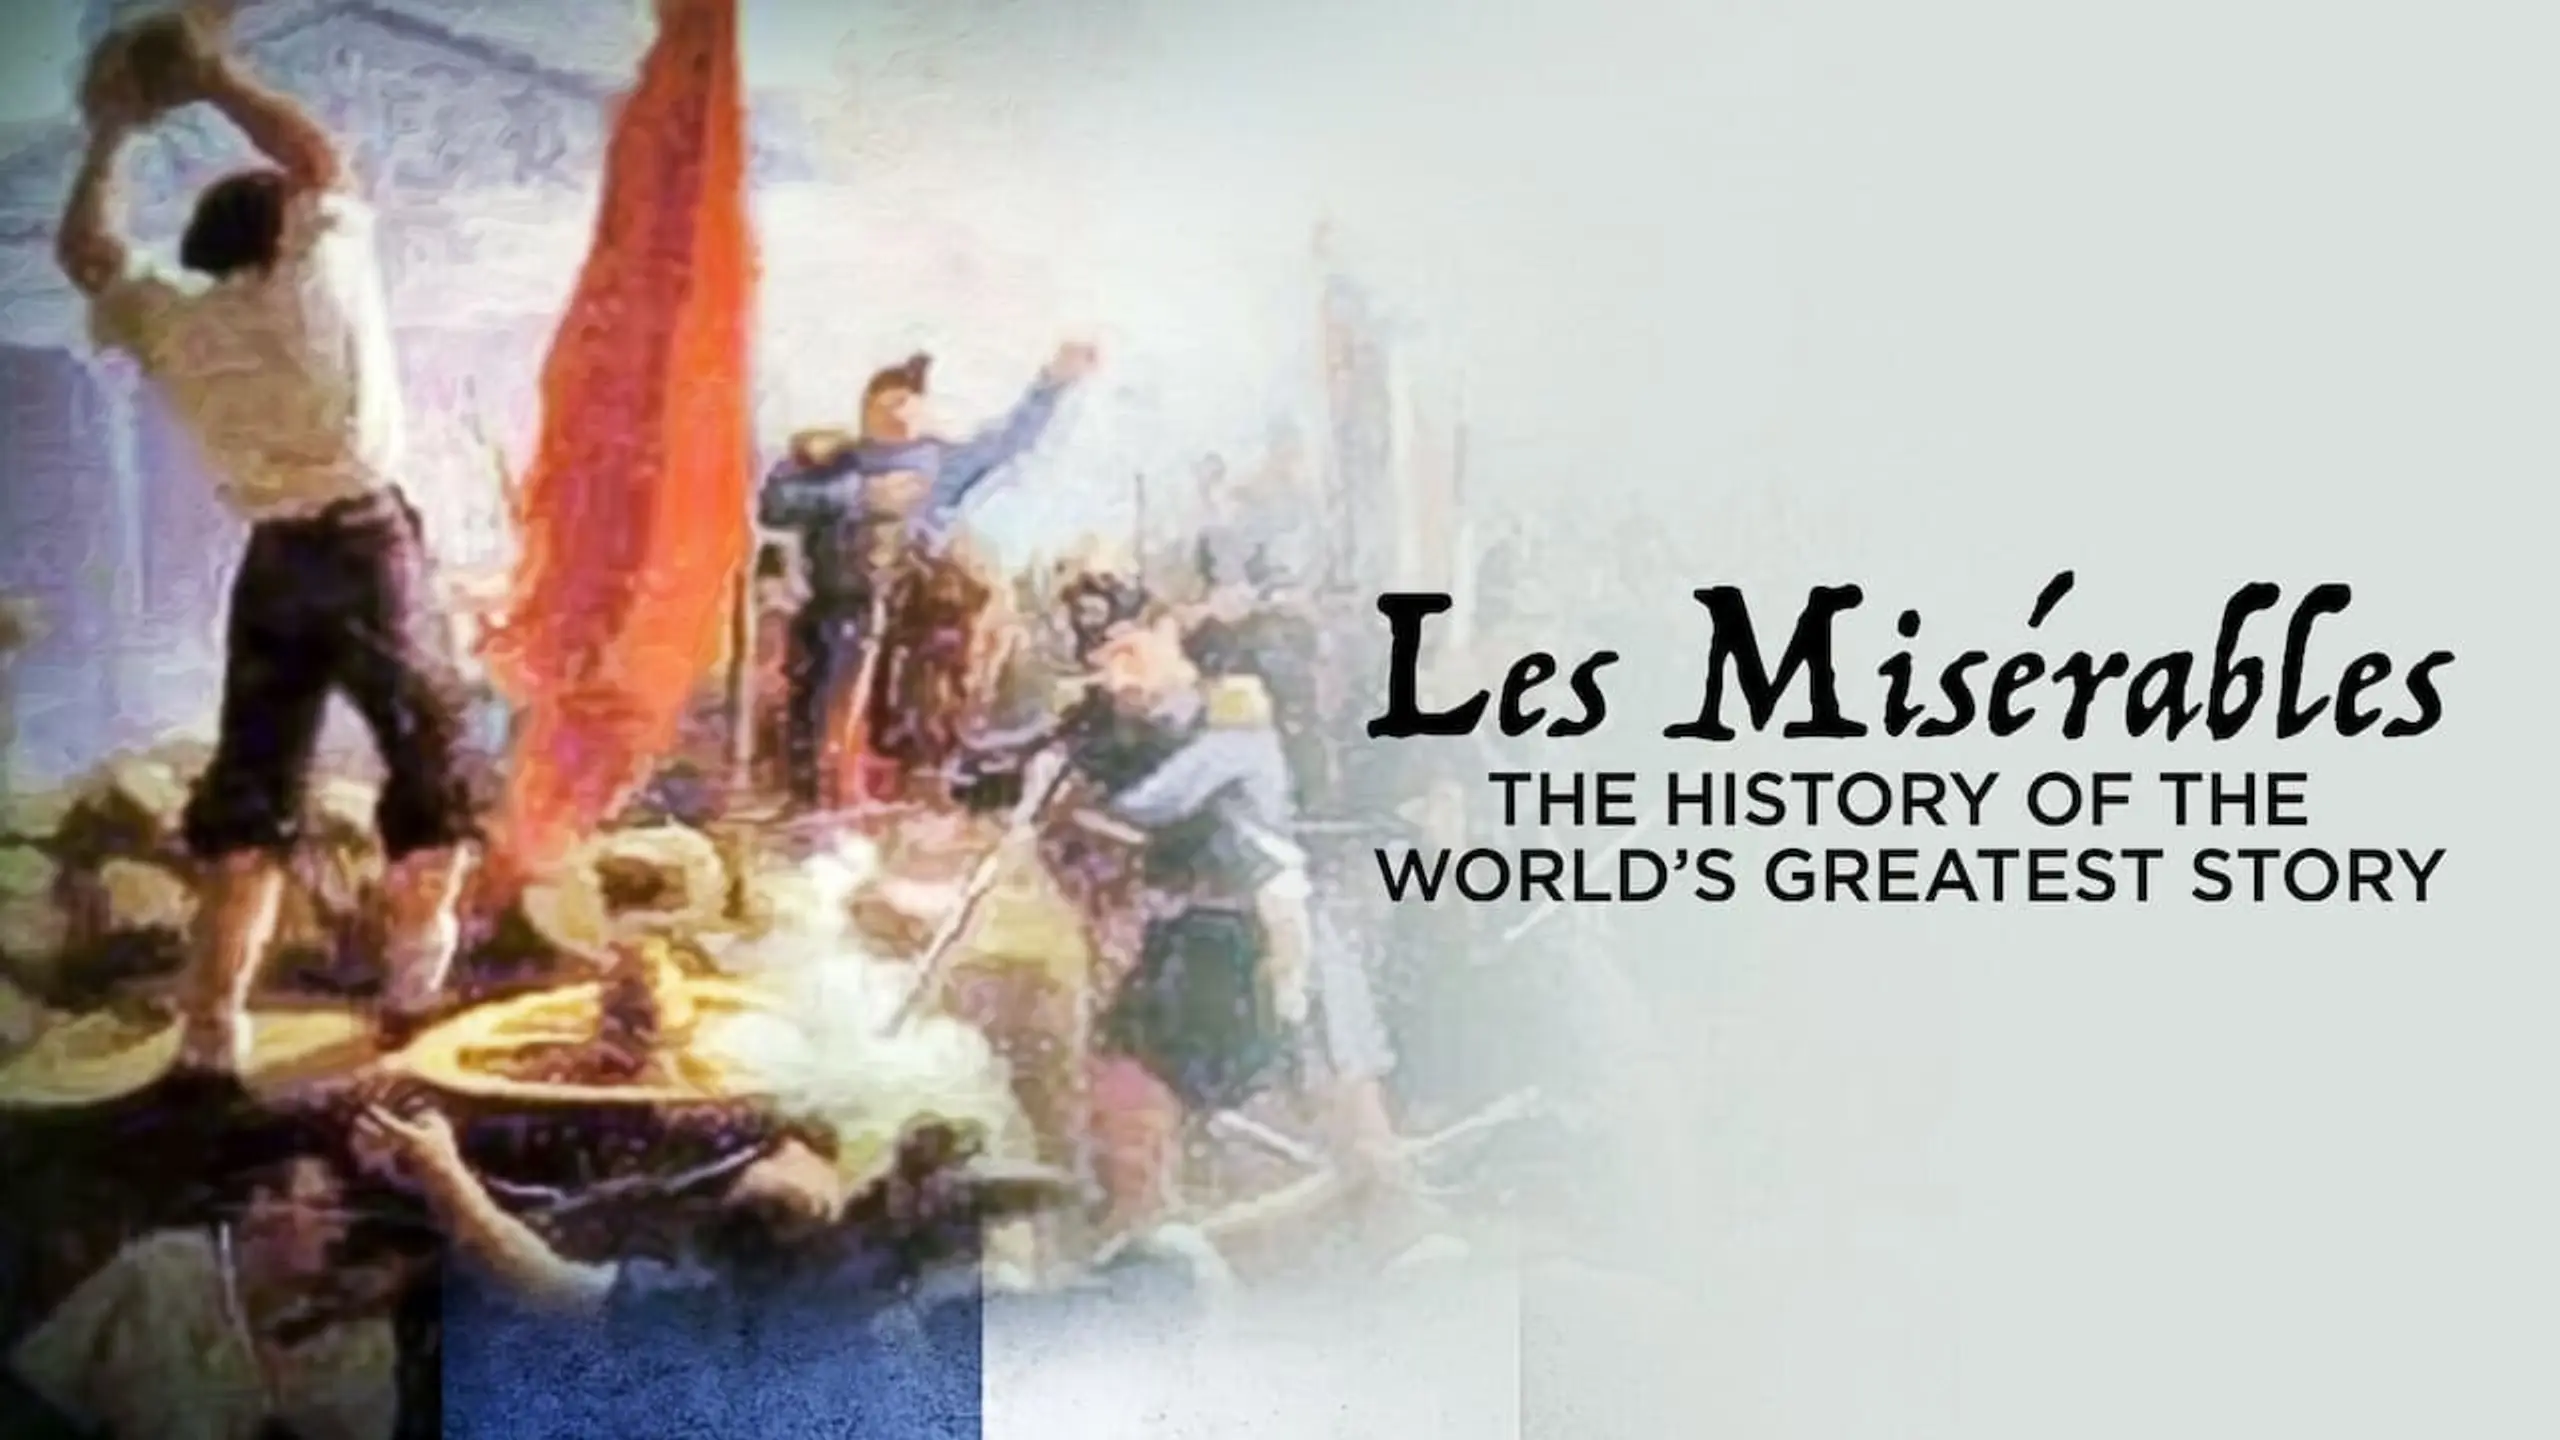 Les Misérables: The History of the World's Greatest Story